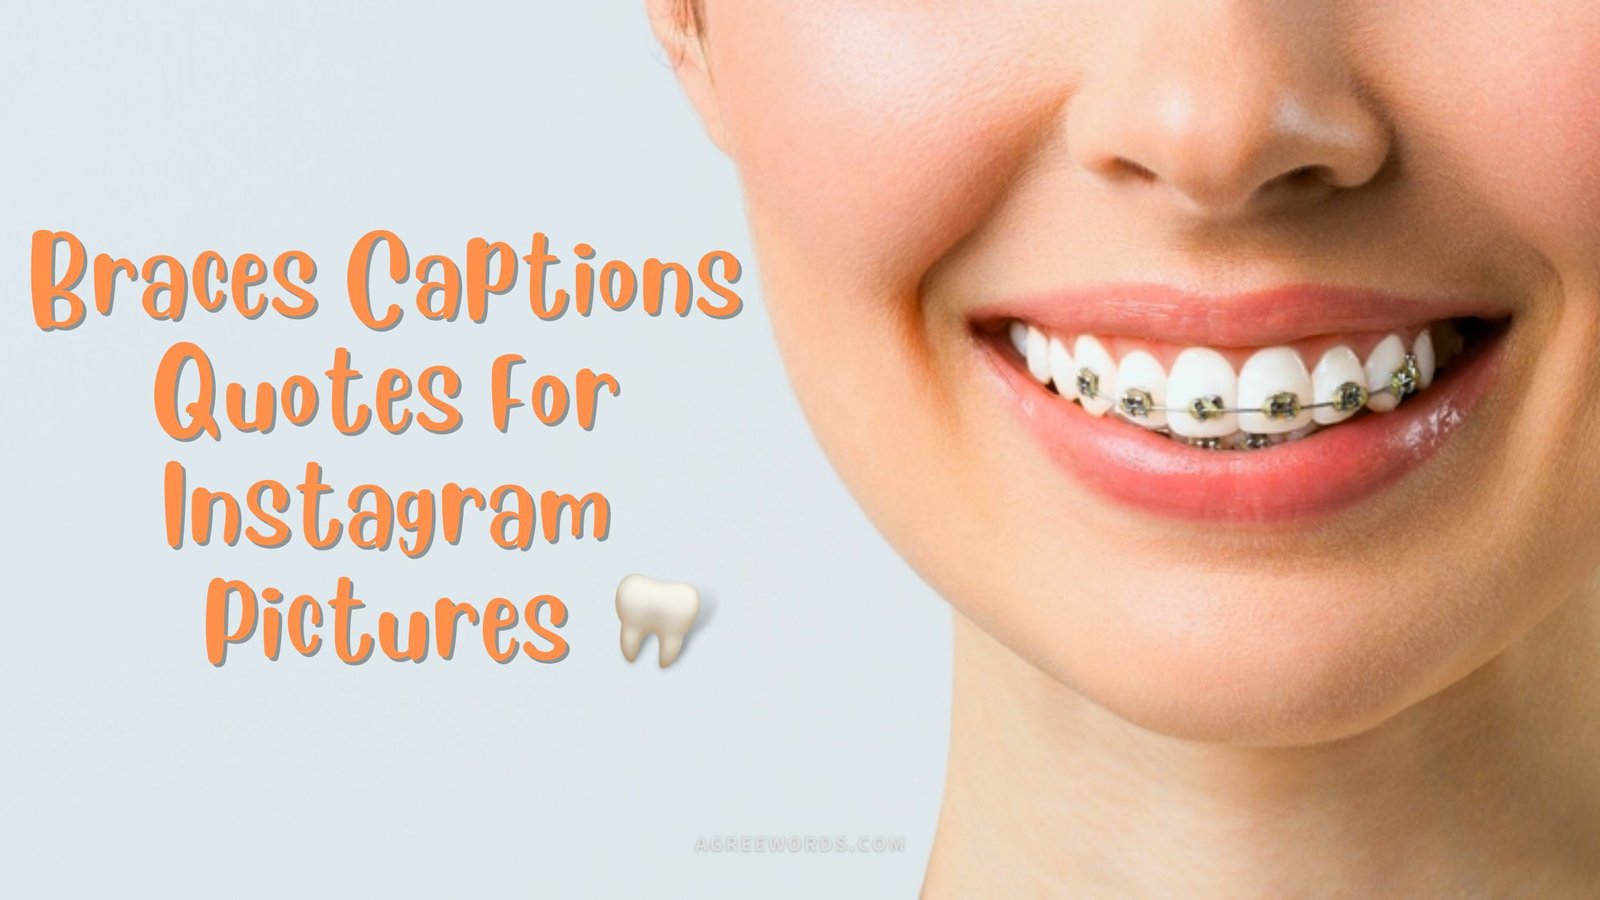 Braces Captions Quotes For Instagram Pictures For Teeth Agree Words